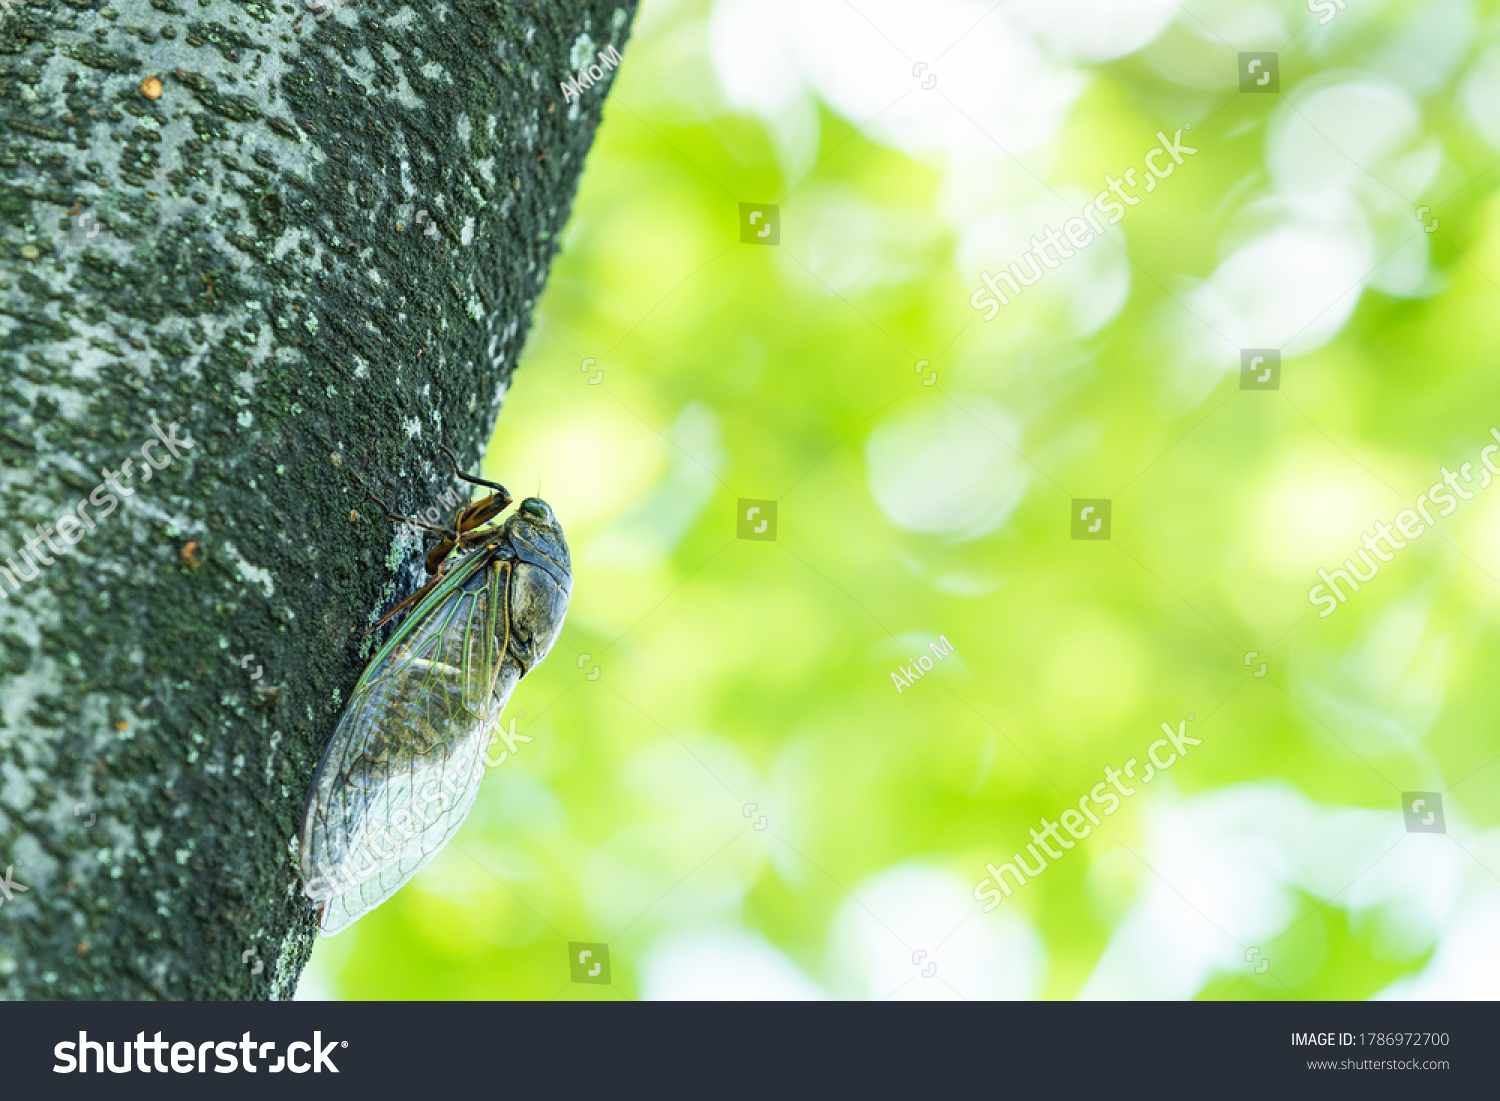 A Black Cicada on The Tree in Summer #1786972700